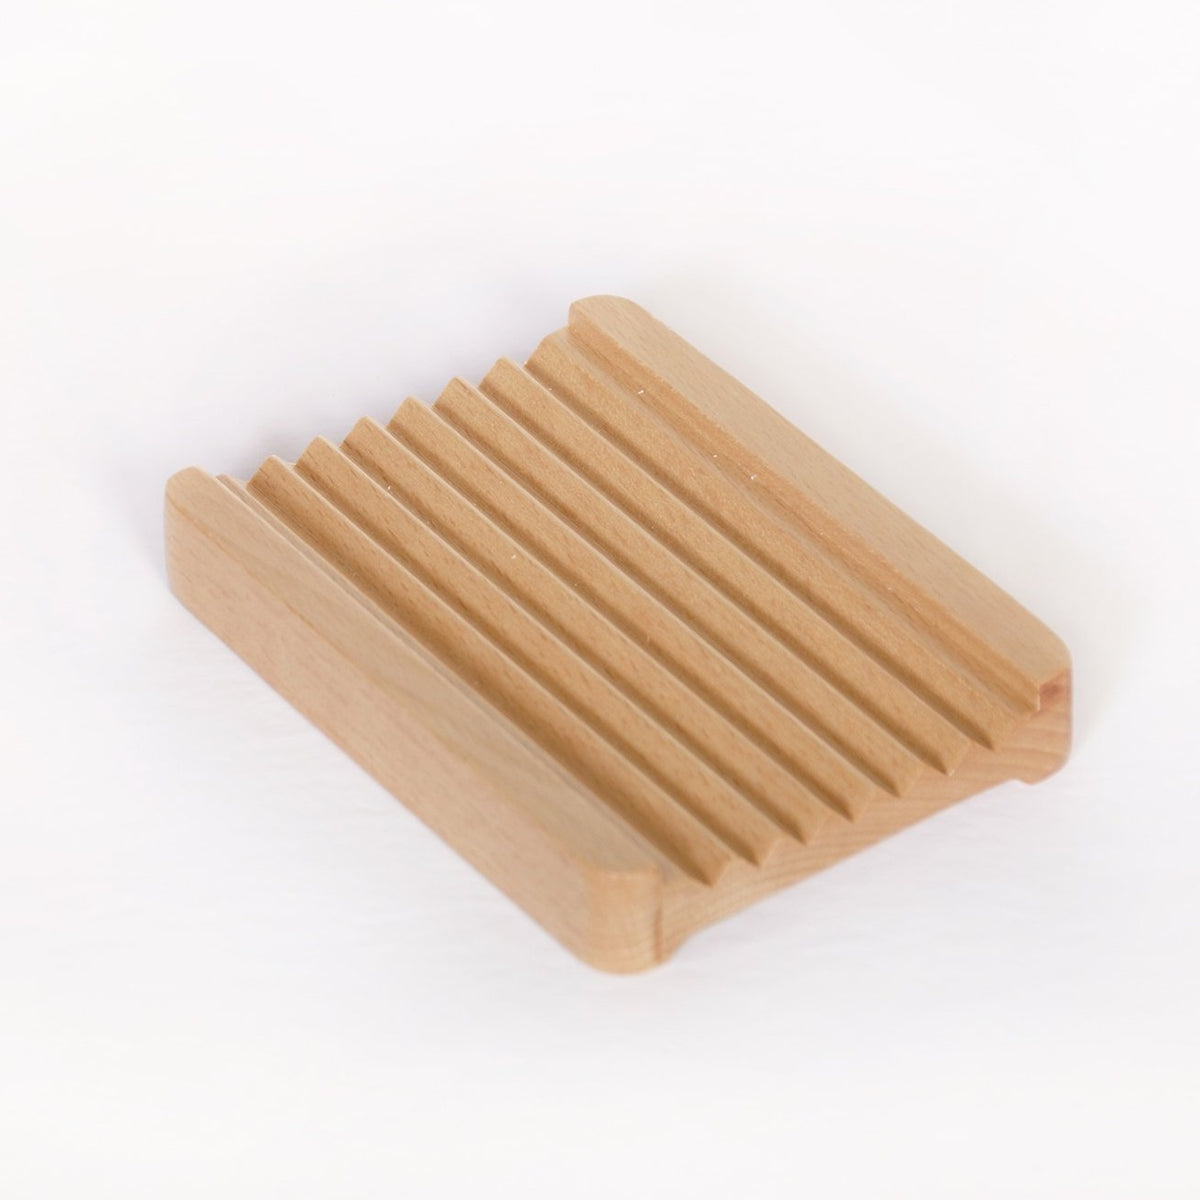 https://ecobeige.com/cdn/shop/products/Eco-Beige-ecofriendly-reusable-natural-bamboo-soap-dish-beige-two-sided-grip-flat-design-kitchen-accessories-tool-sustainable-compostable-plastic-free-alternative-vancouver-Eco-Beige_1200x1200.jpg?v=1627777599